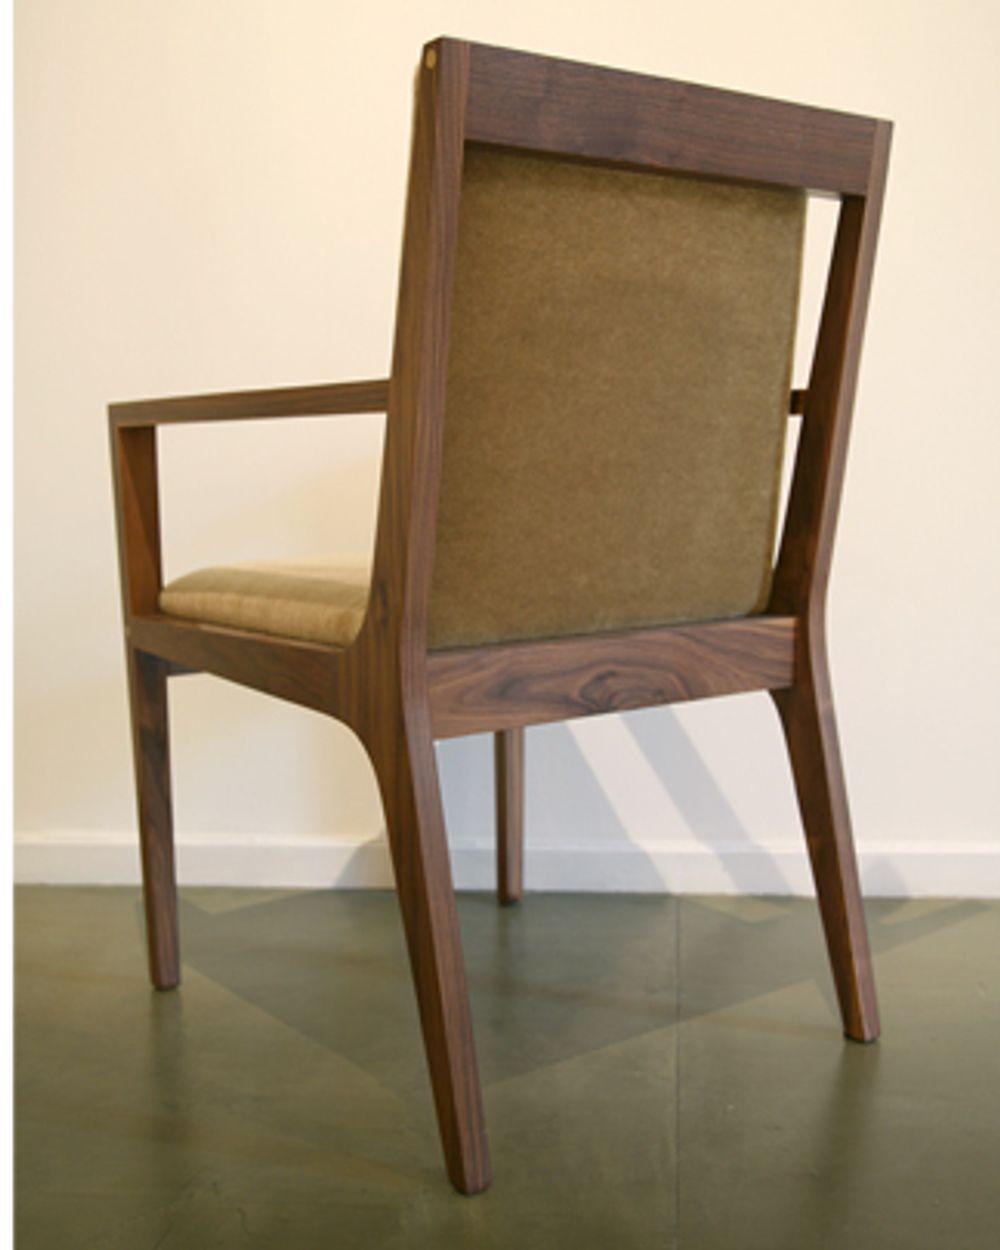 Black walnut dining chair with upholstery (customer provides their own fabric).